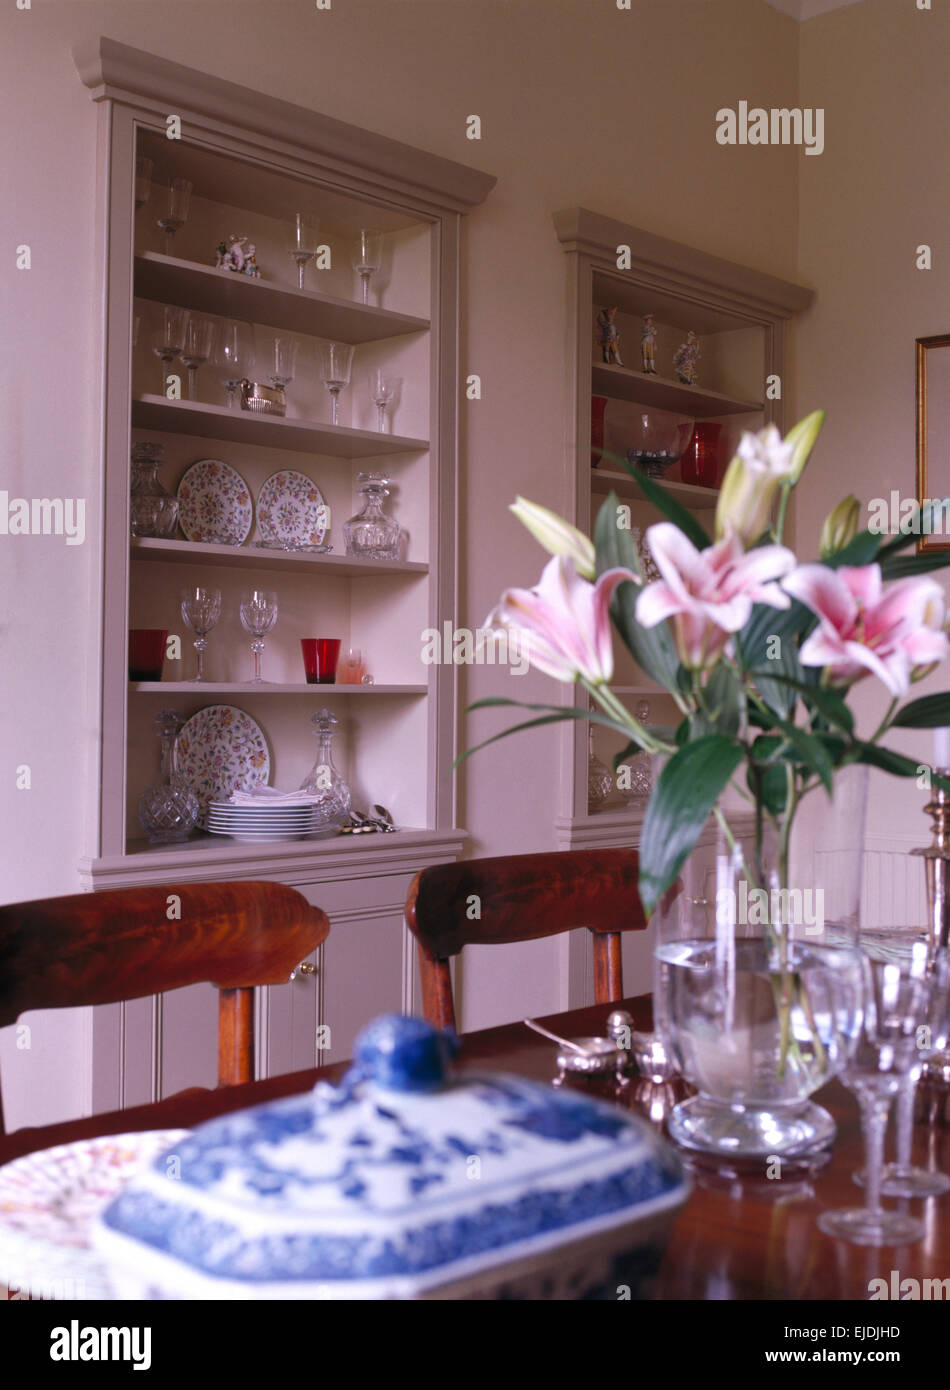 Vase of pink lilies on table set for lunch in traditional dining room with alcove shelving Stock Photo